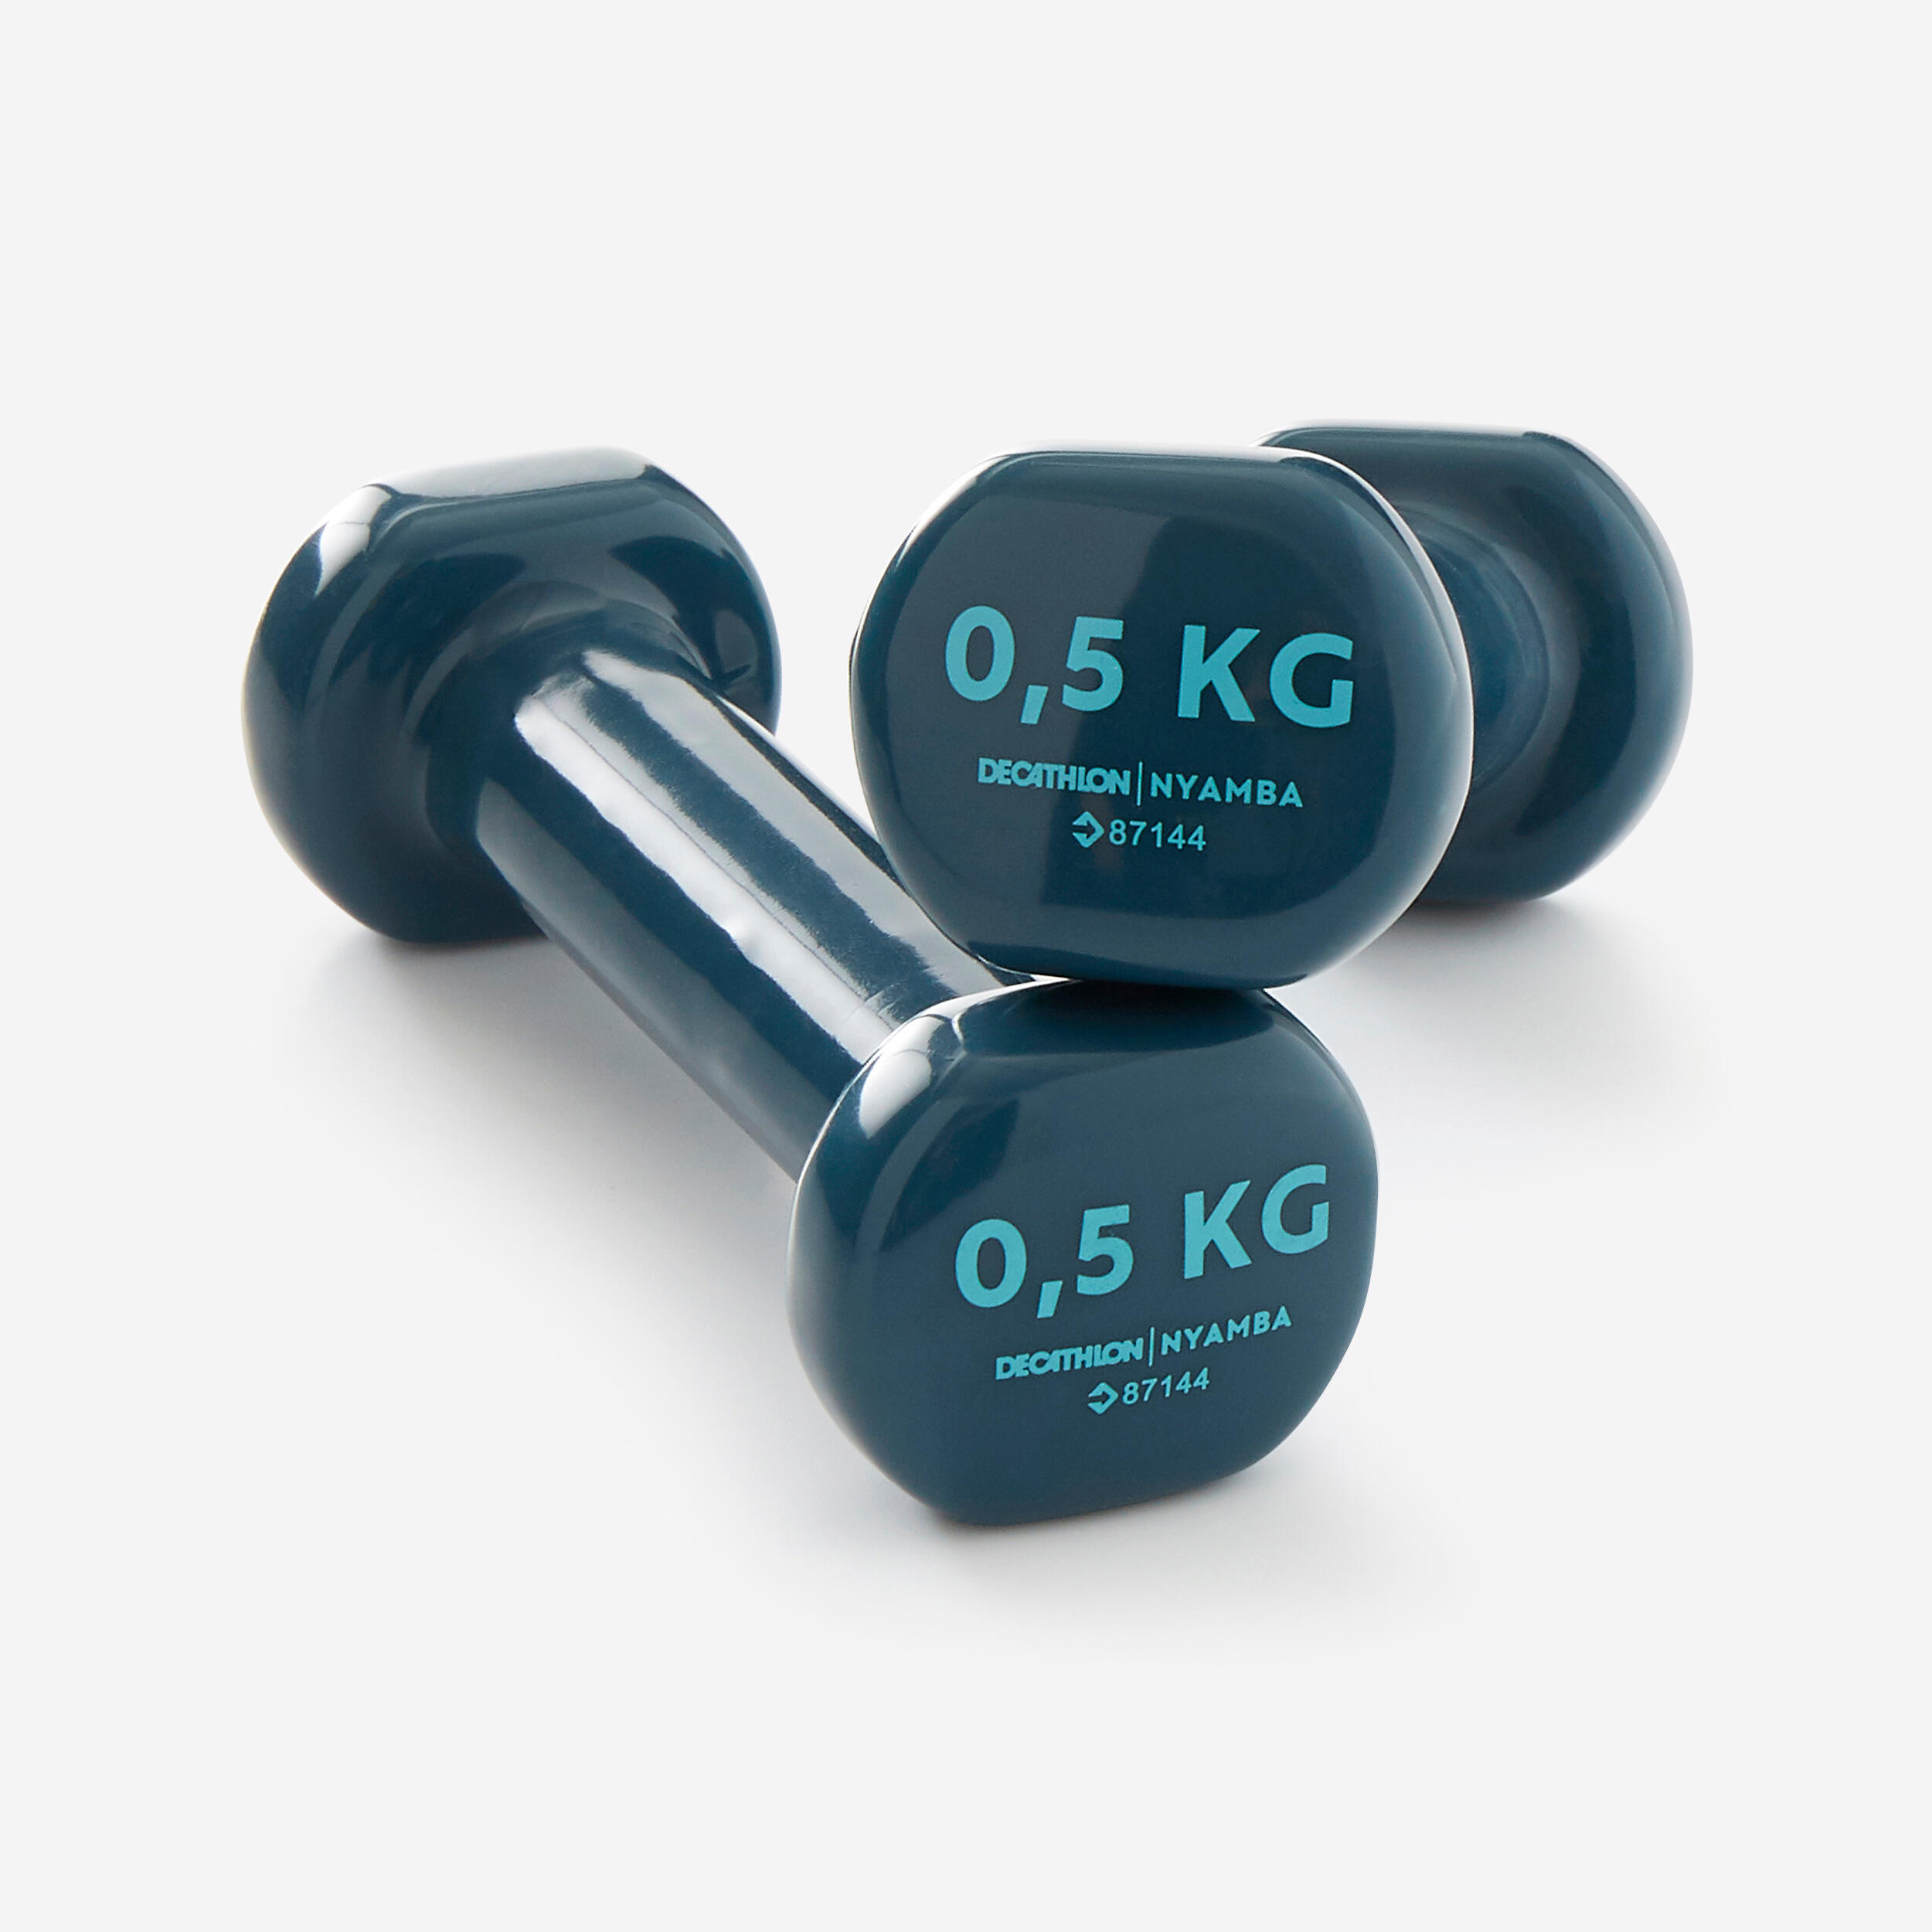 DOMYOS 0.5 kg Fitness Dumbbells Twin-Pack - Navy Blue